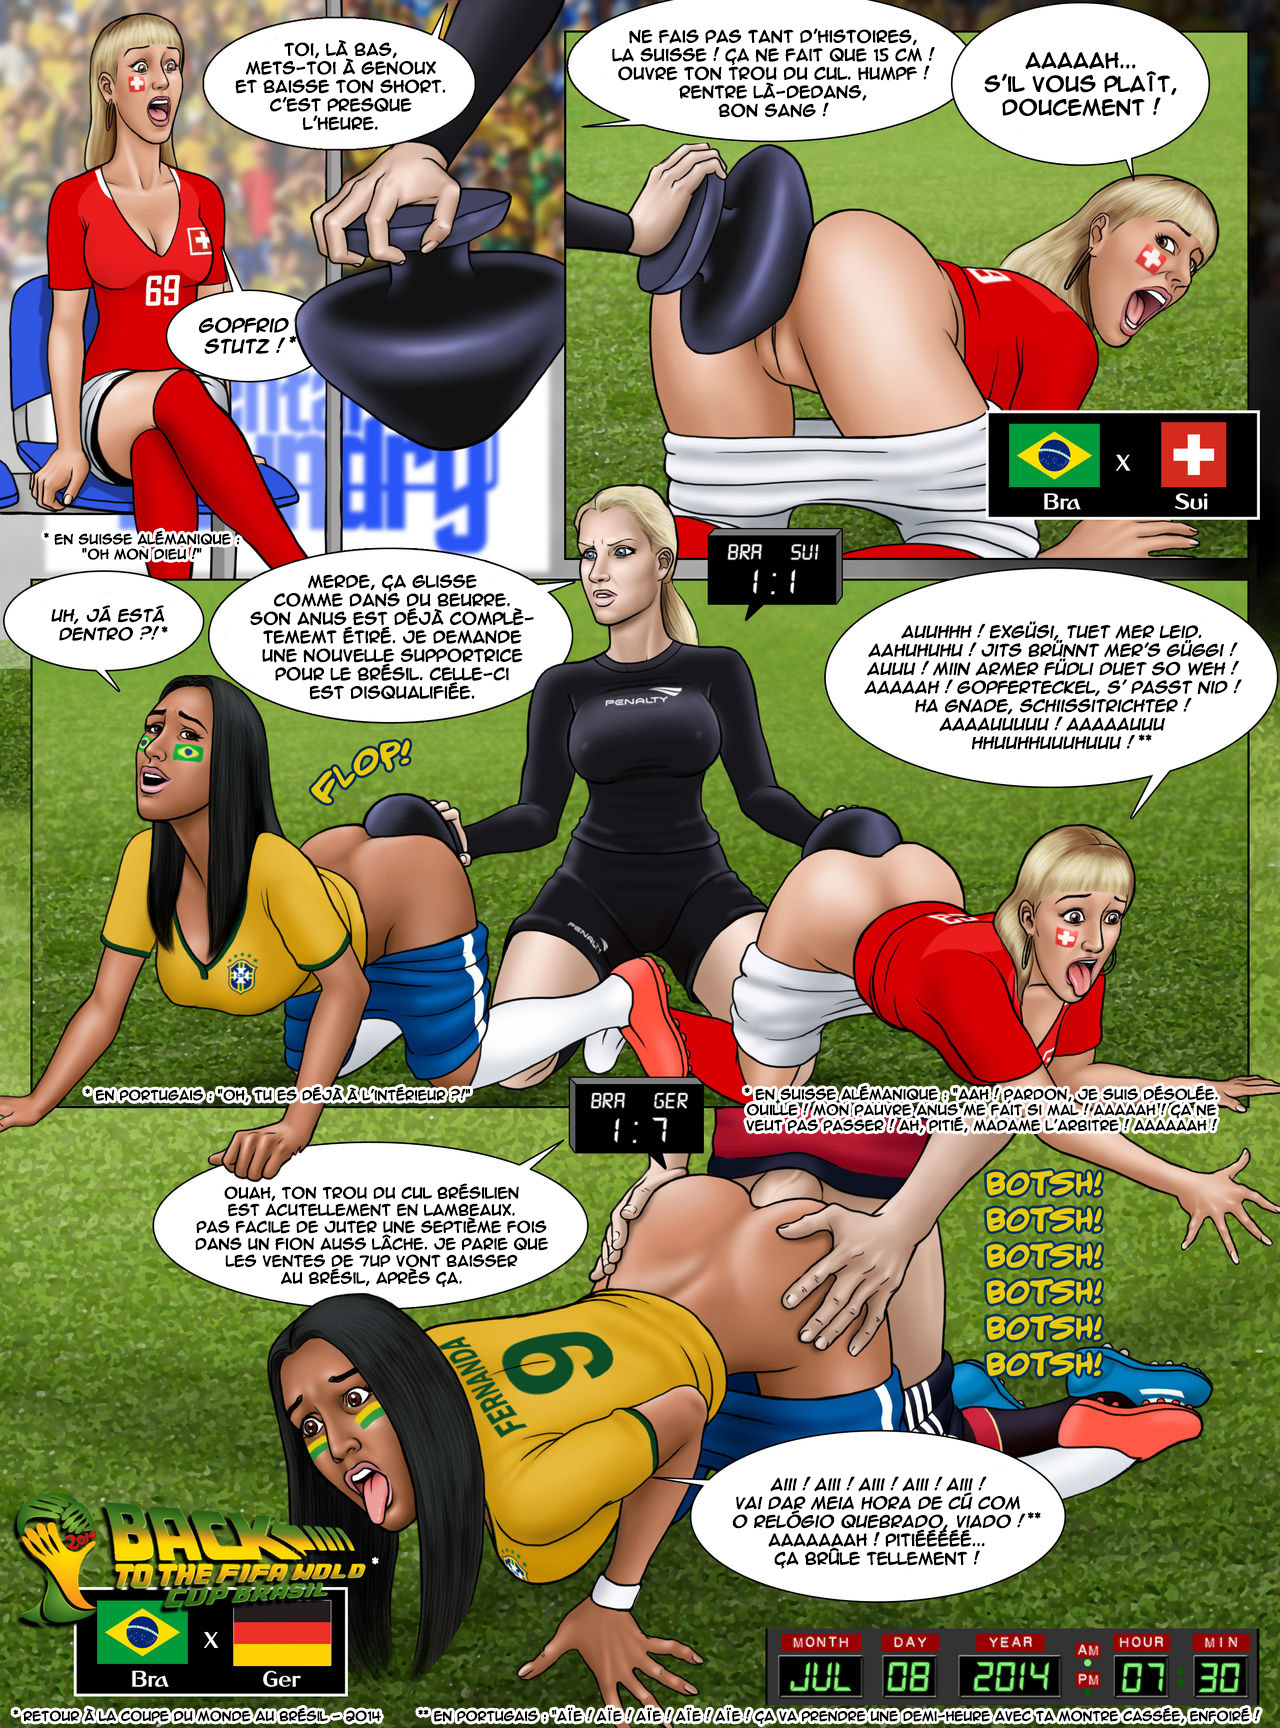 FIFA World Cup Russia 2018 - Soccer Hentai - Womens World Cup France 2019 numero d'image 6